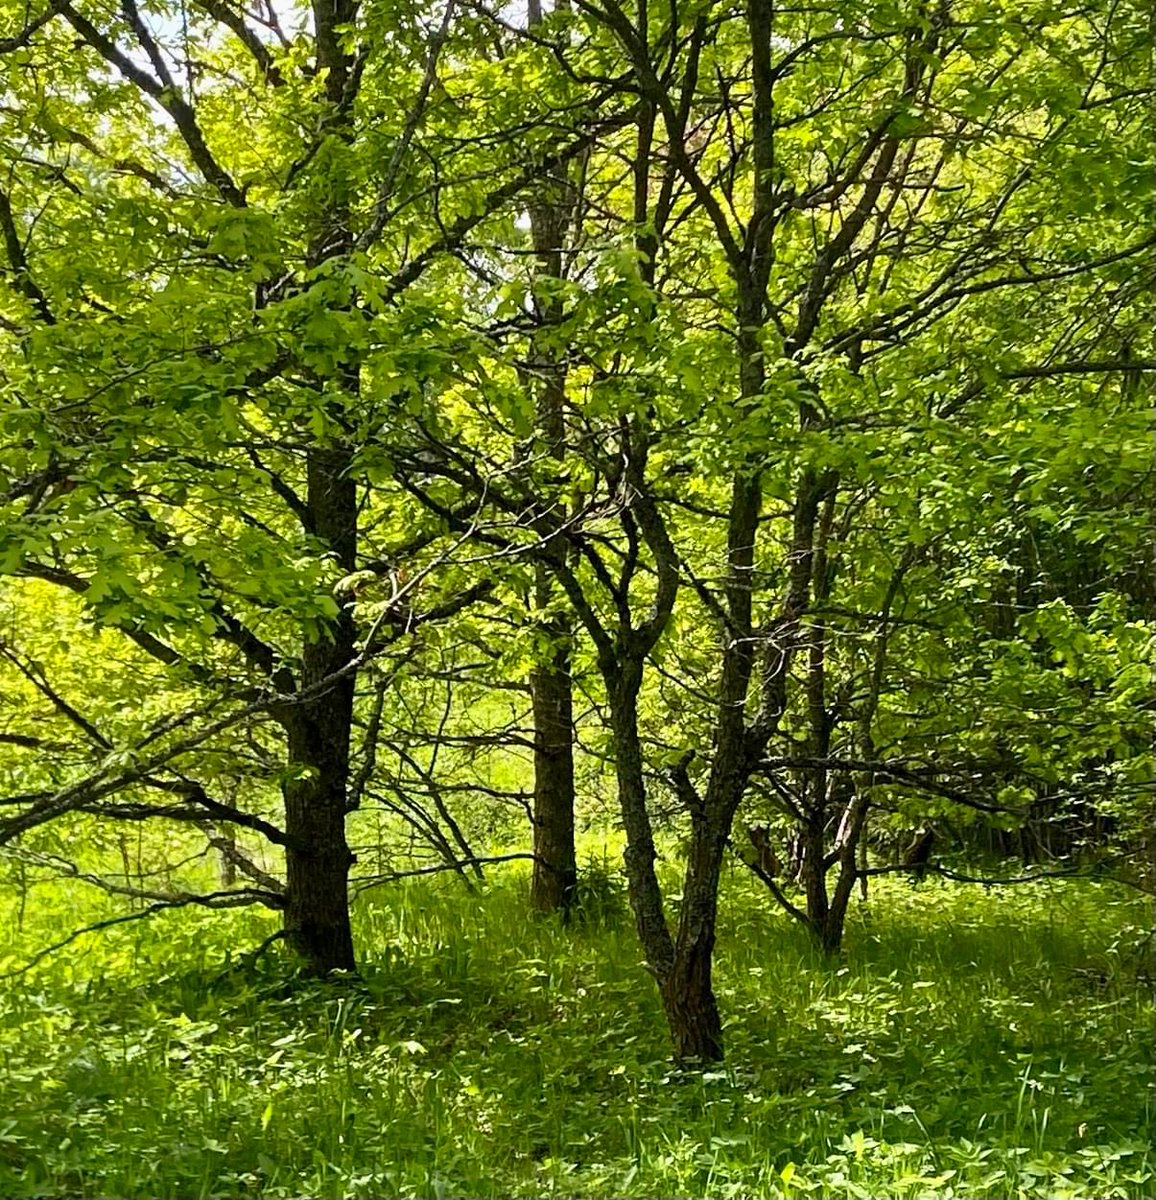 Peaceful scene - oaks wrapped in green 
#green #trees #nature #peaceful